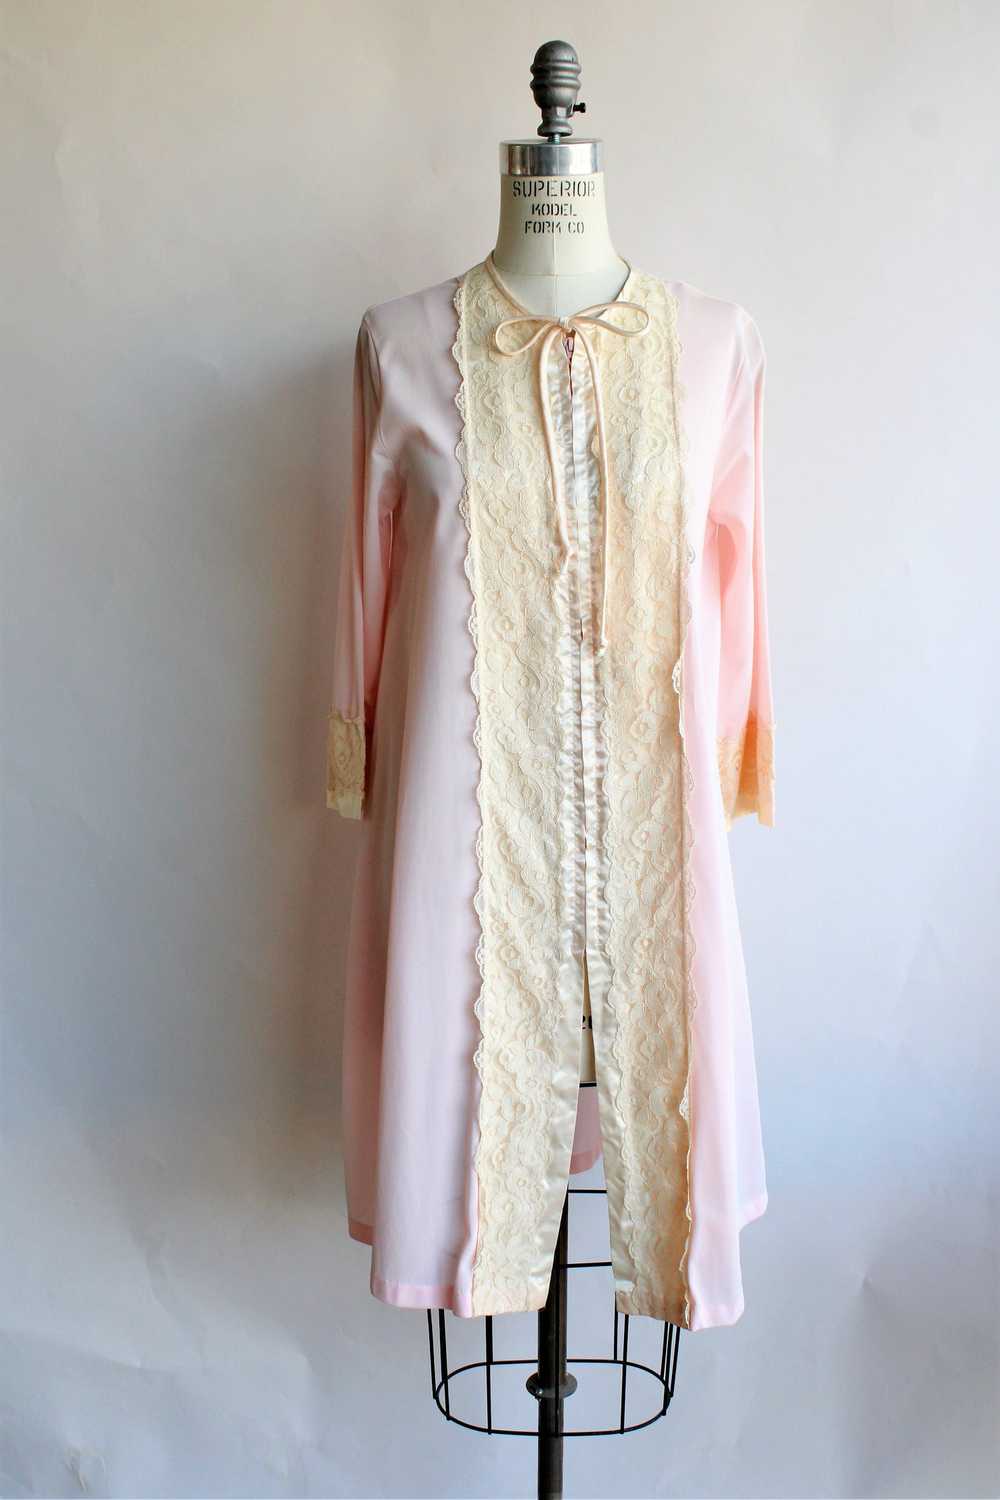 Vintage 1970s Gilead Pink And Lace Nylon Robe wit… - image 1